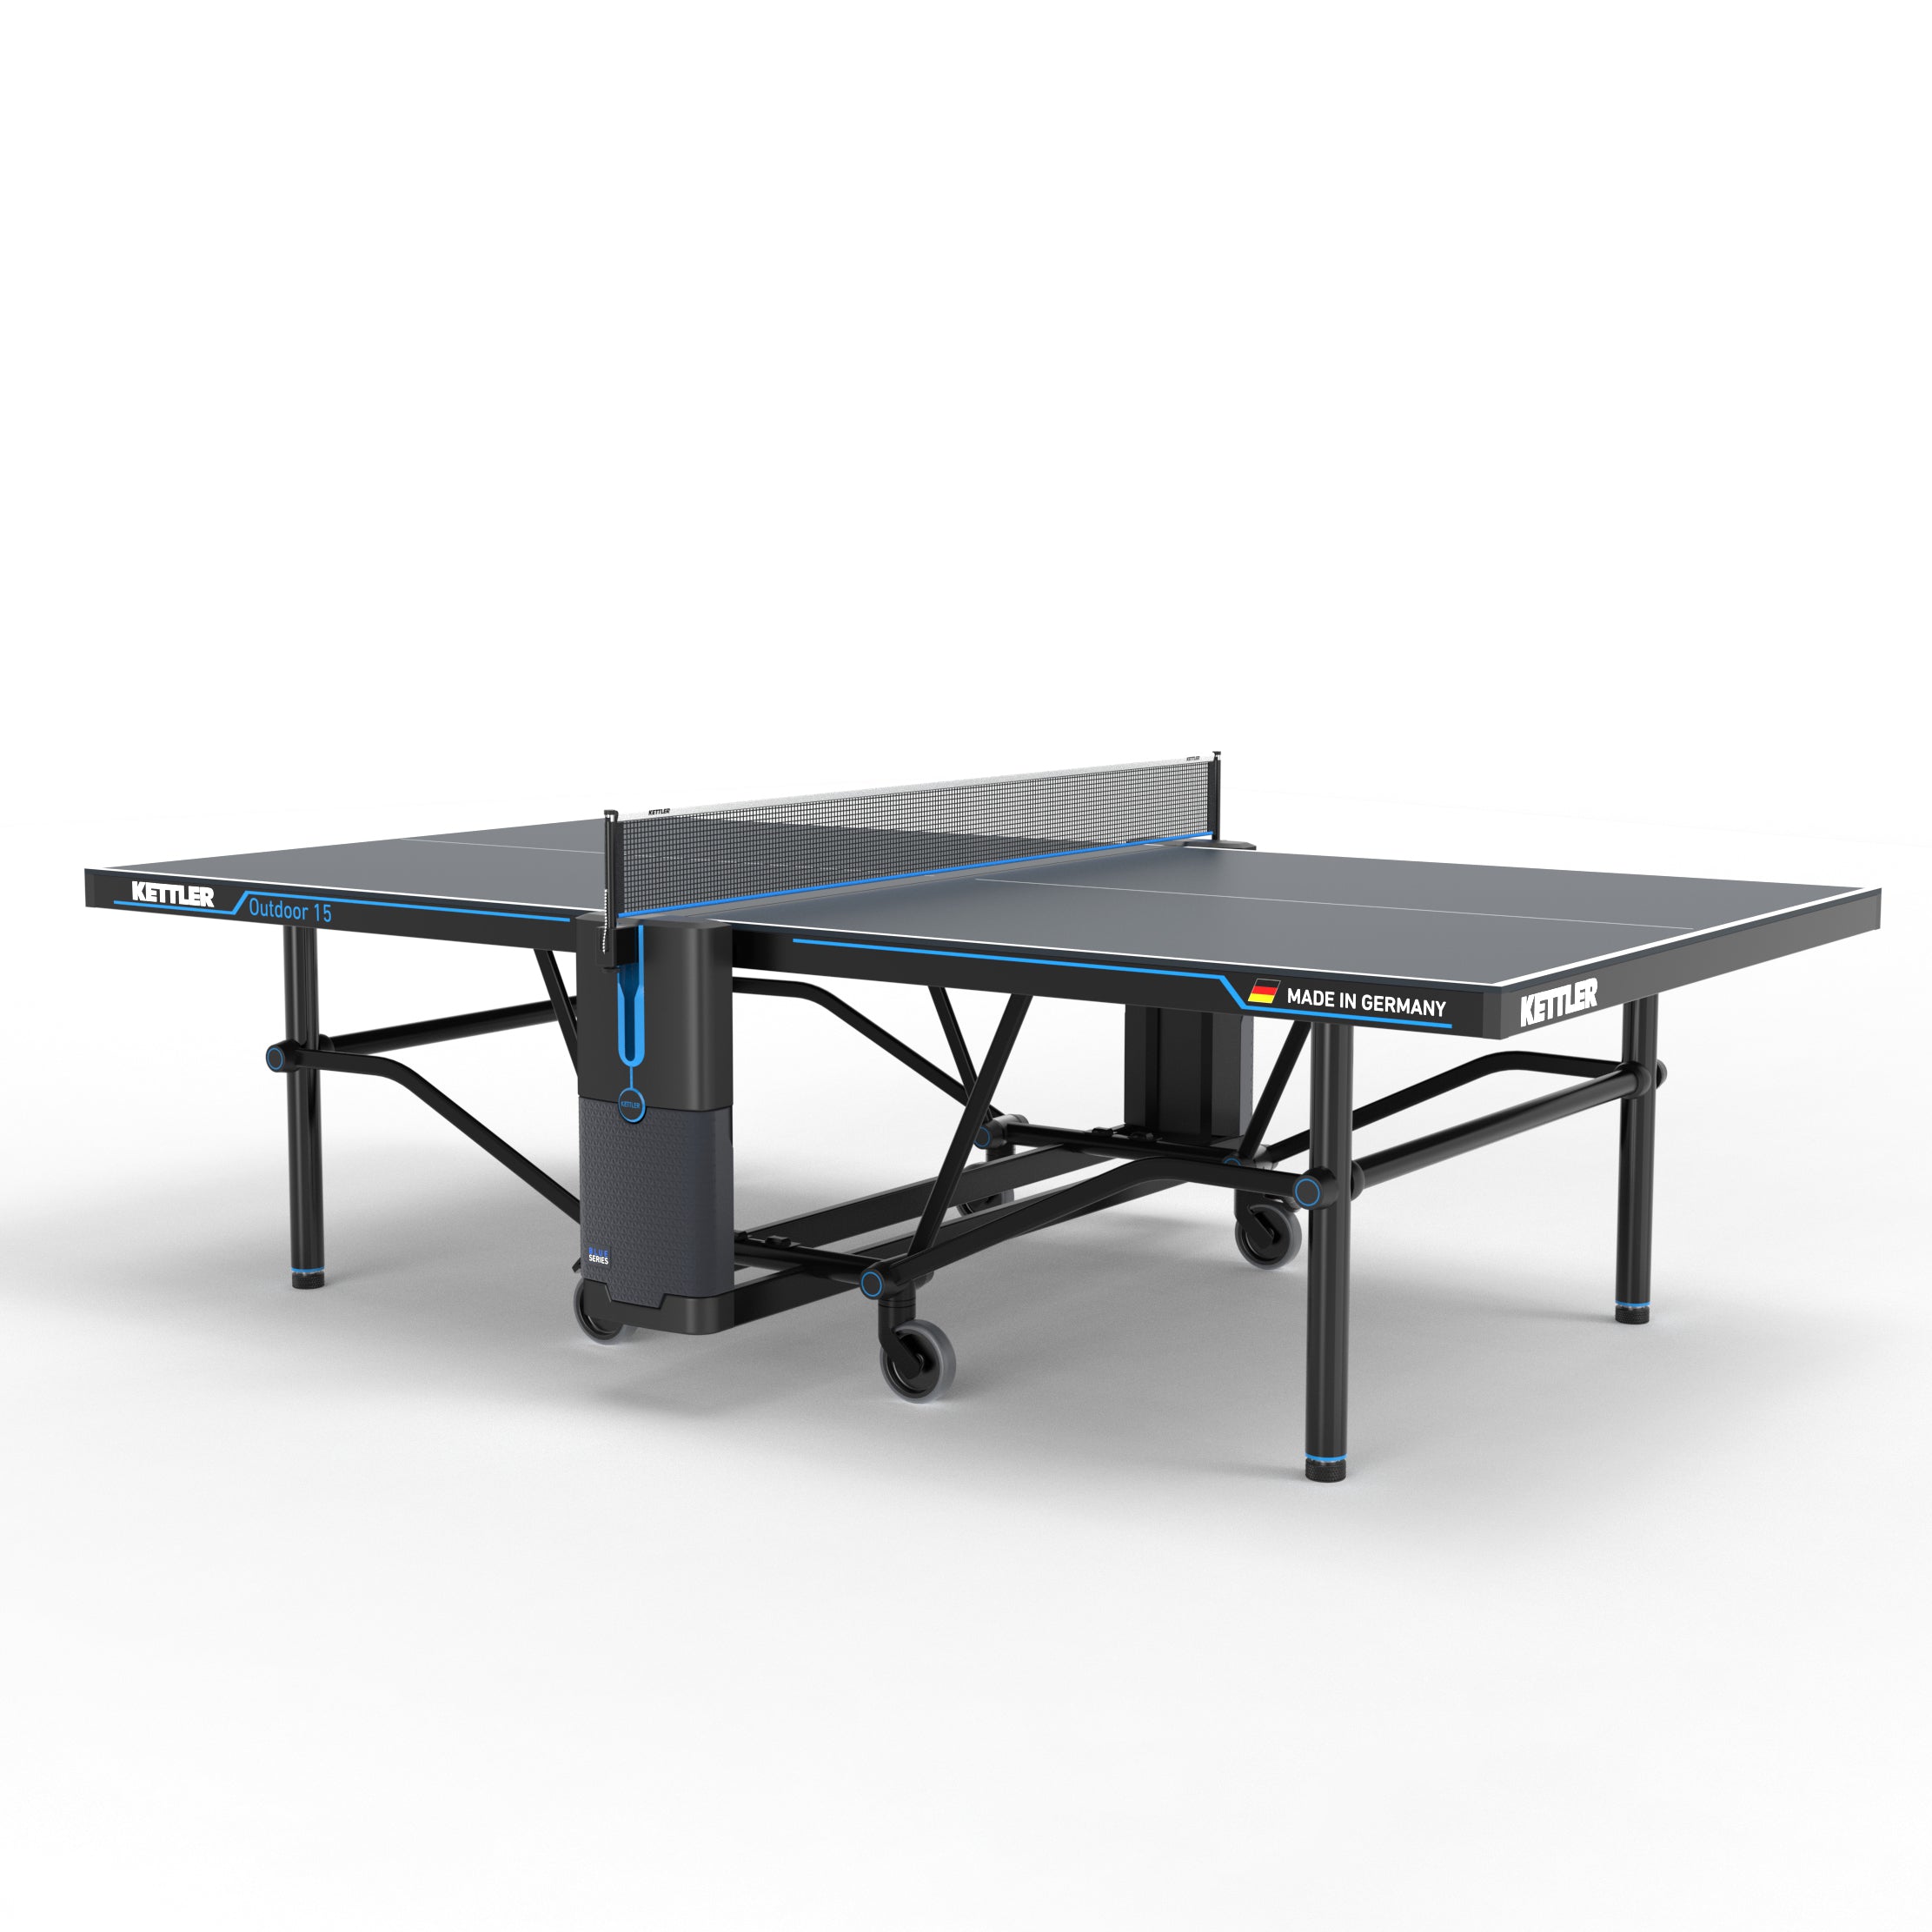 Made in Germany outdoor table tennis table in play position 